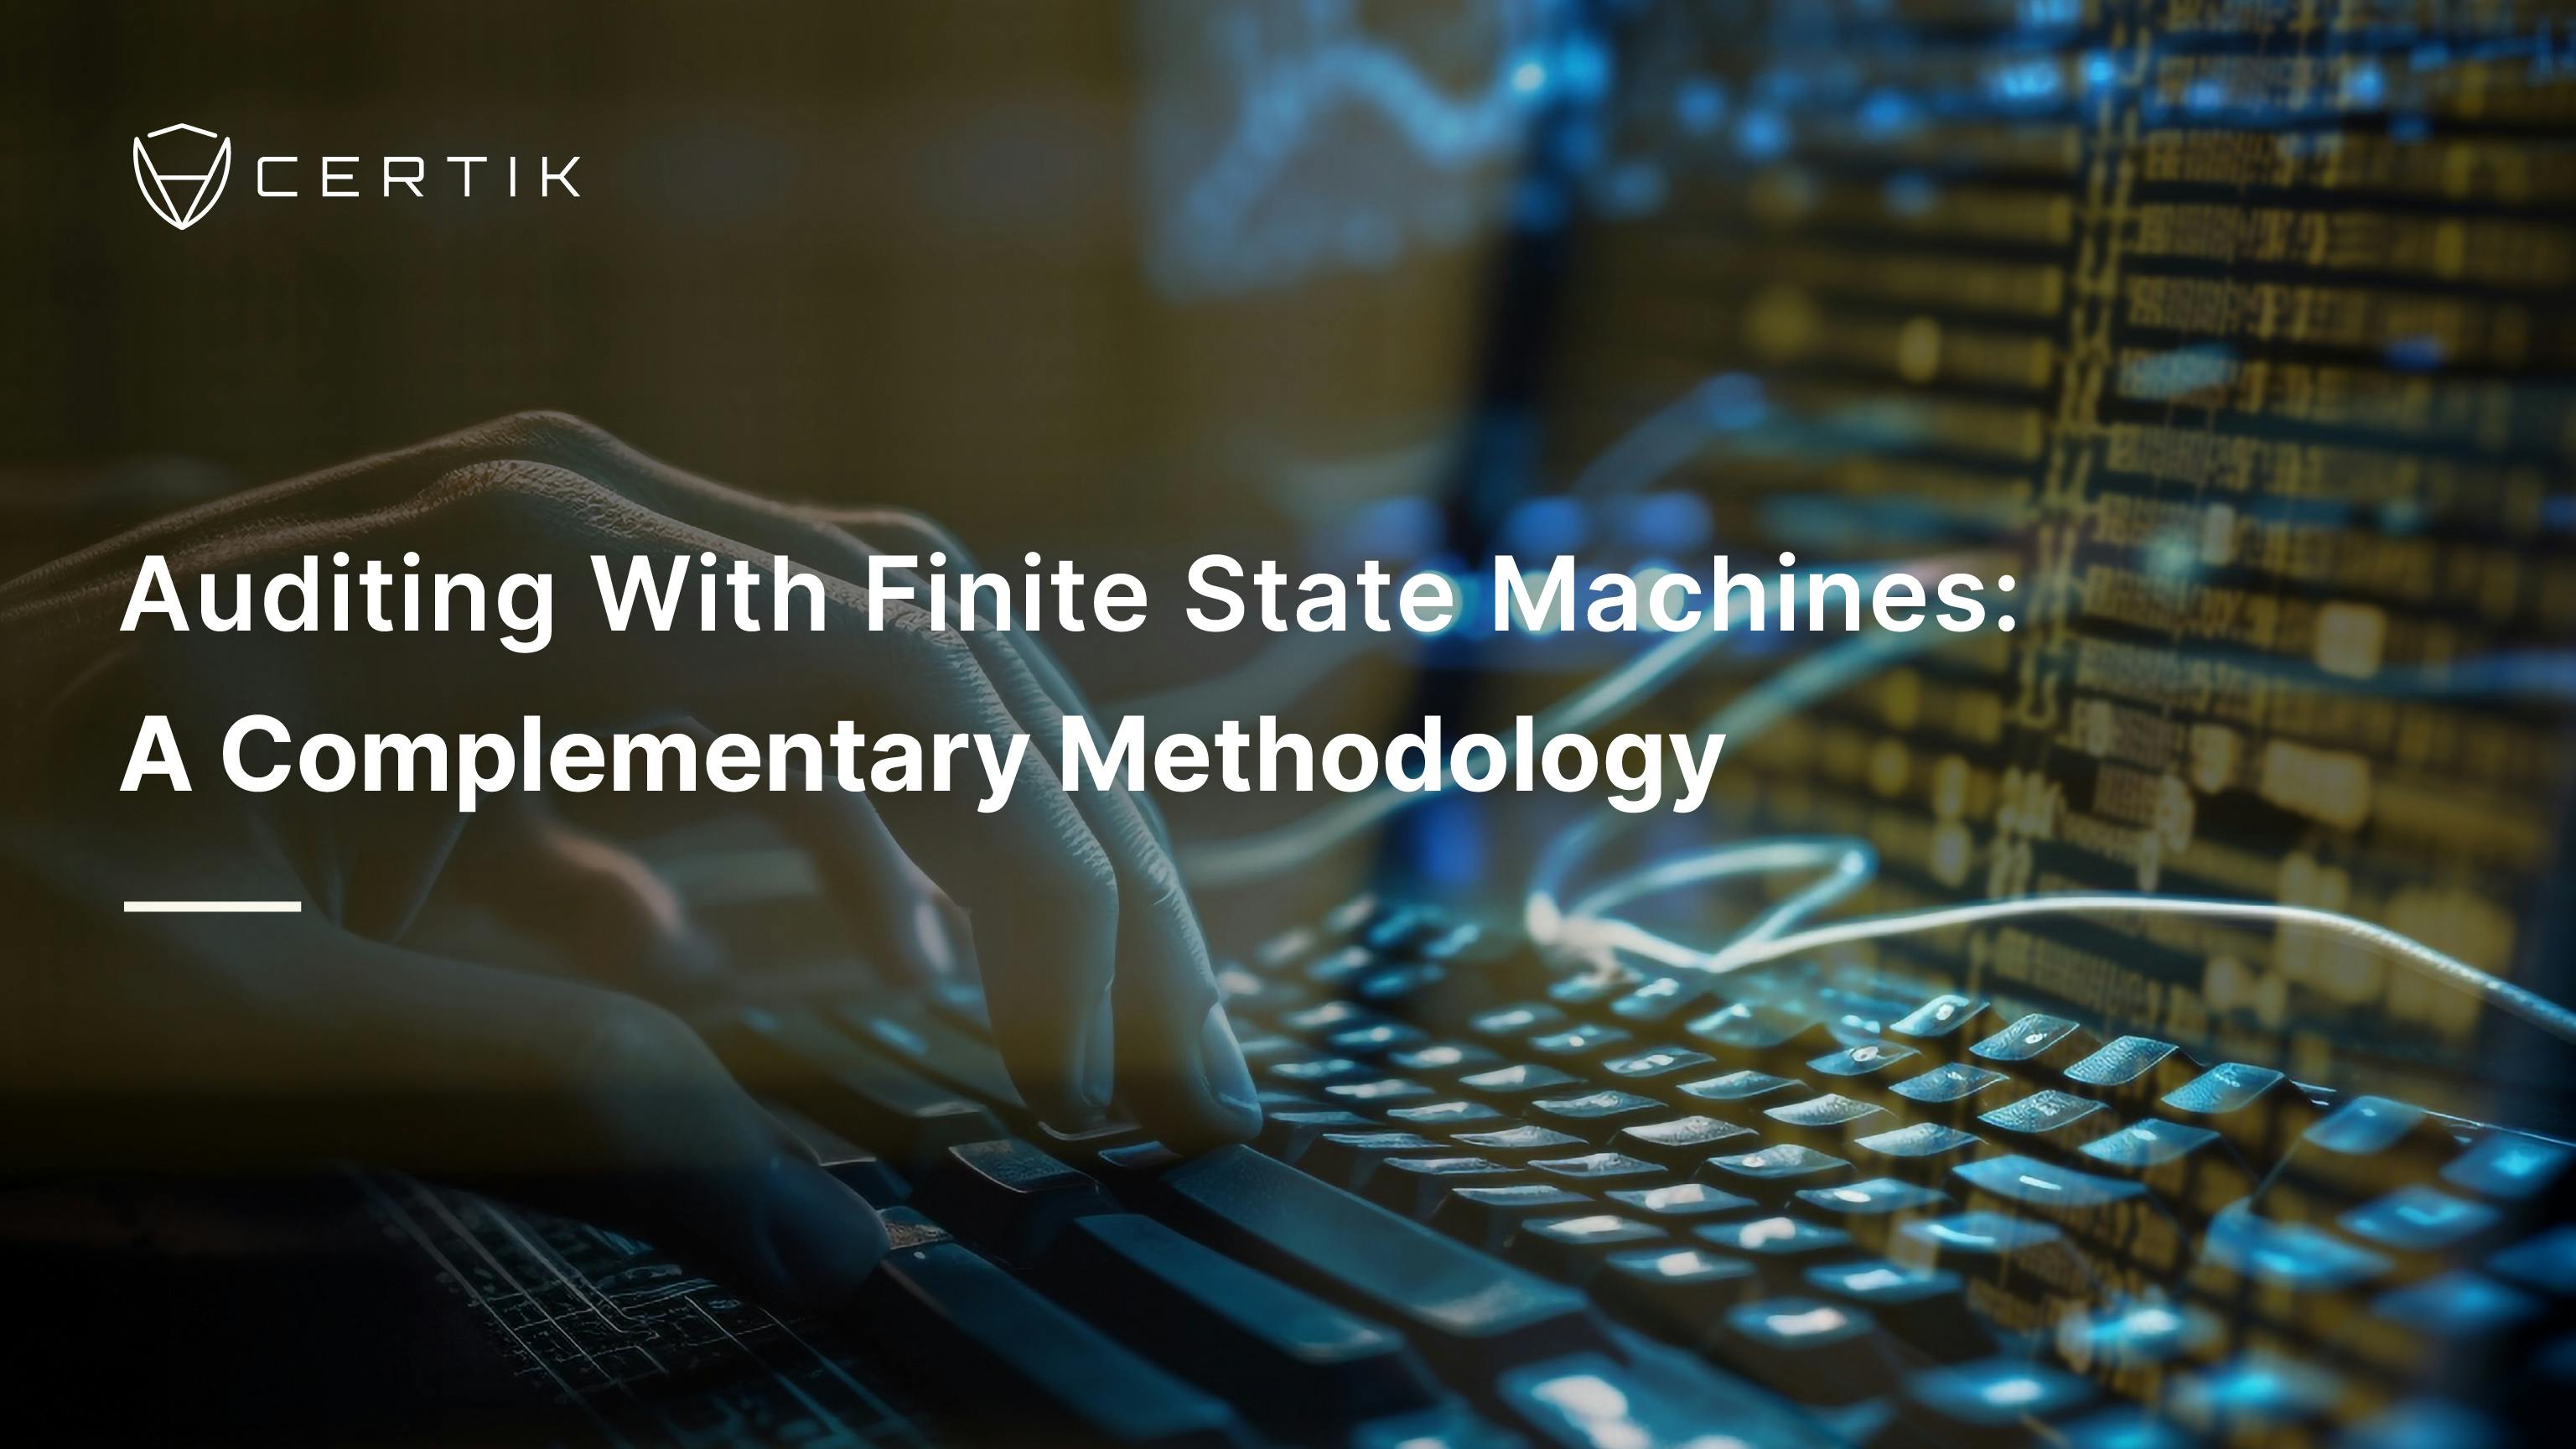 Auditing With Finite State Machines: A Complementary Methodology